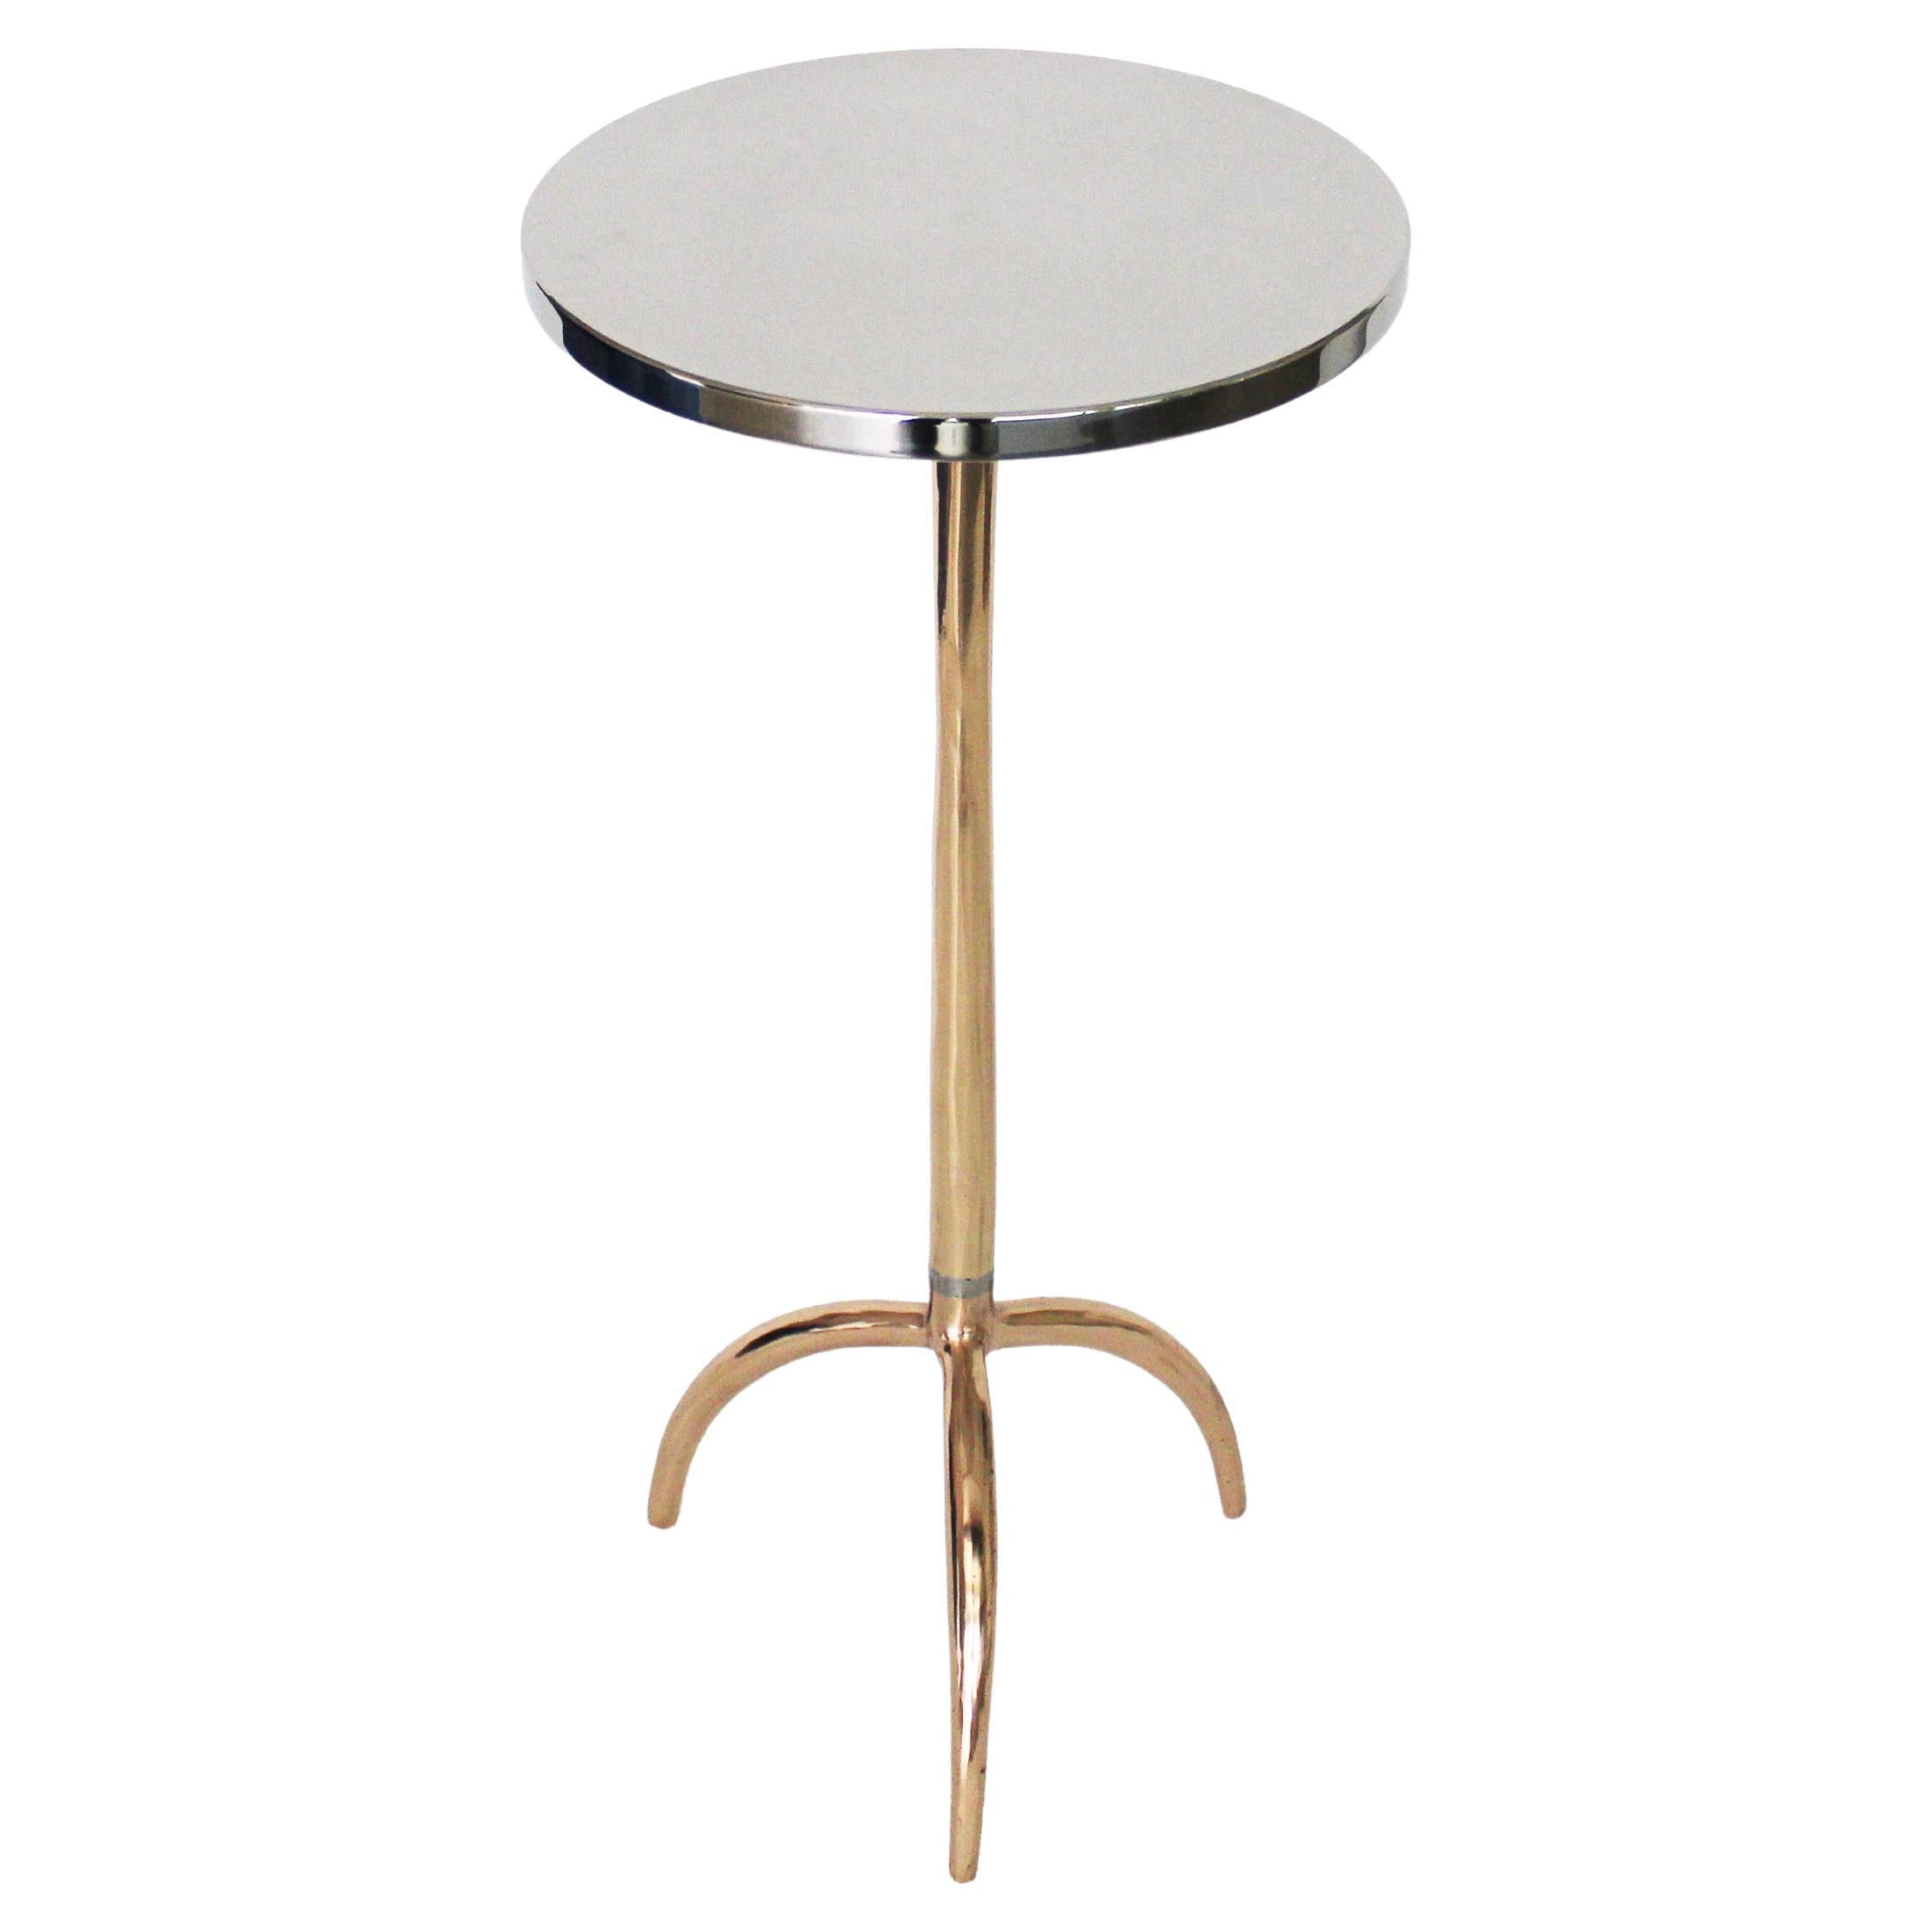 Cast Bronze and Stainless Steel Colla Side Table by Studio Sunt